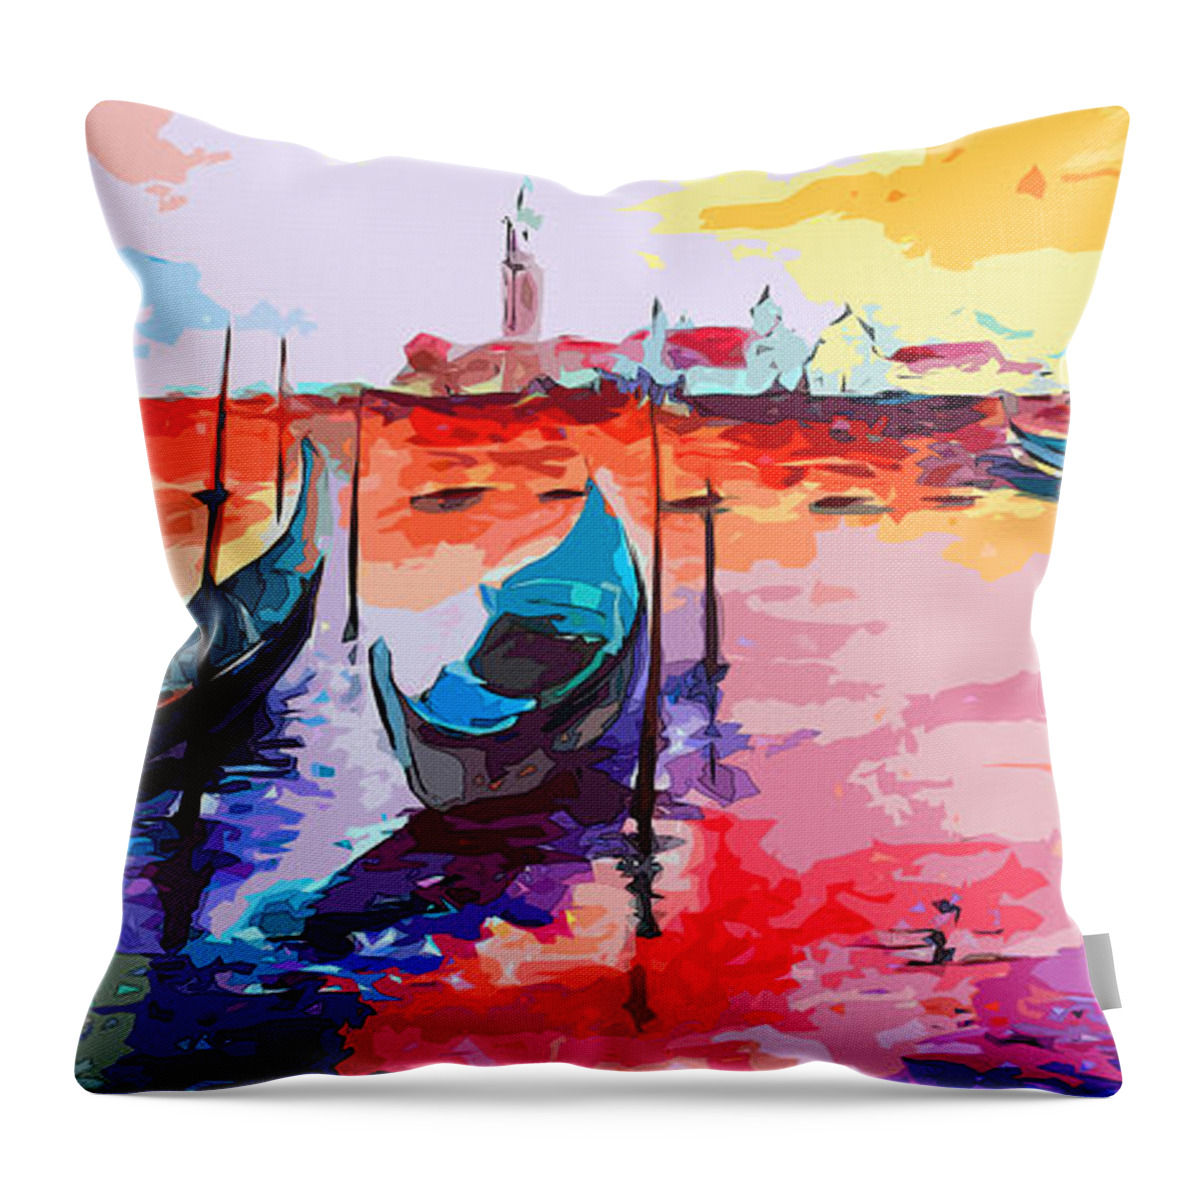 Abstract Throw Pillow featuring the painting Abstract Venice Gondolas by Ginette Callaway